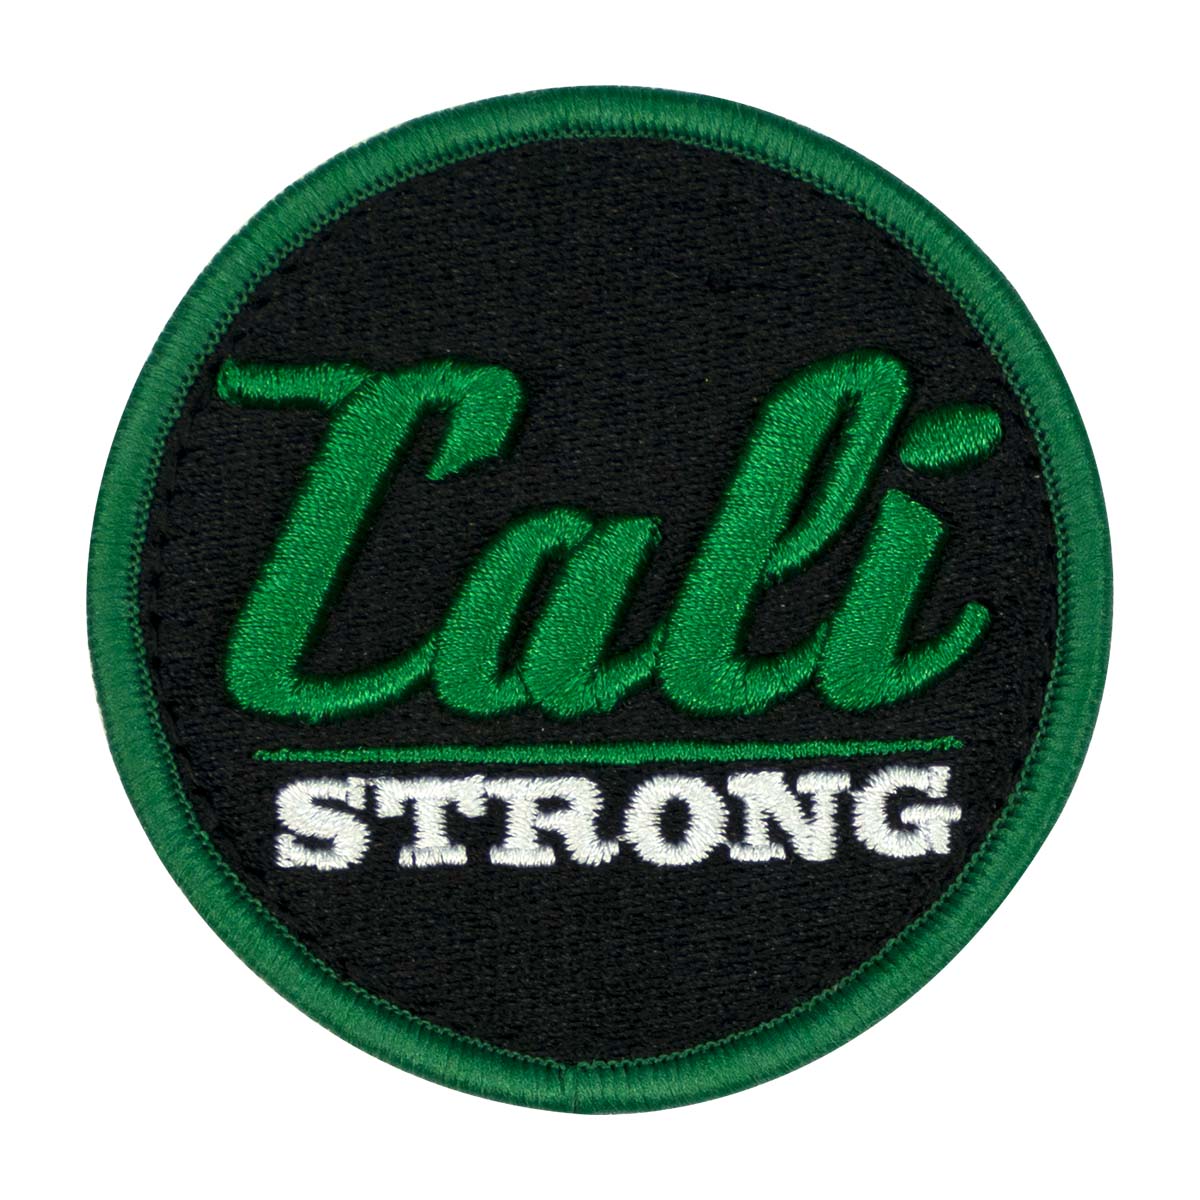 CALI Strong Black Green White Round 3D Embroidered Hook-and-Loop Moral